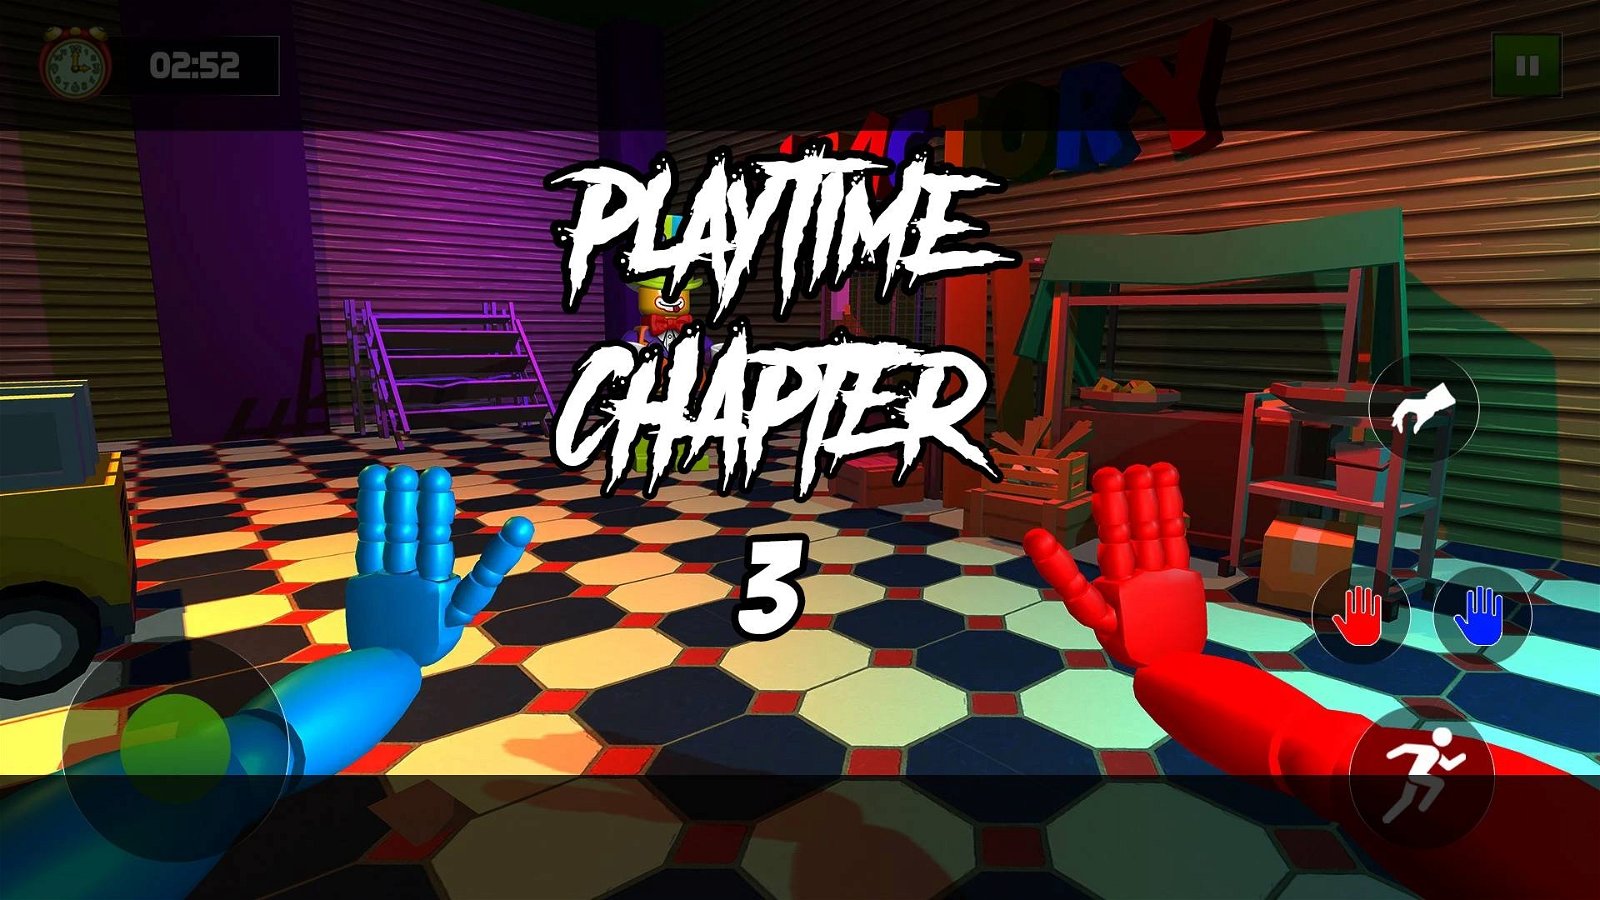 Pappy playtime Chapter 3